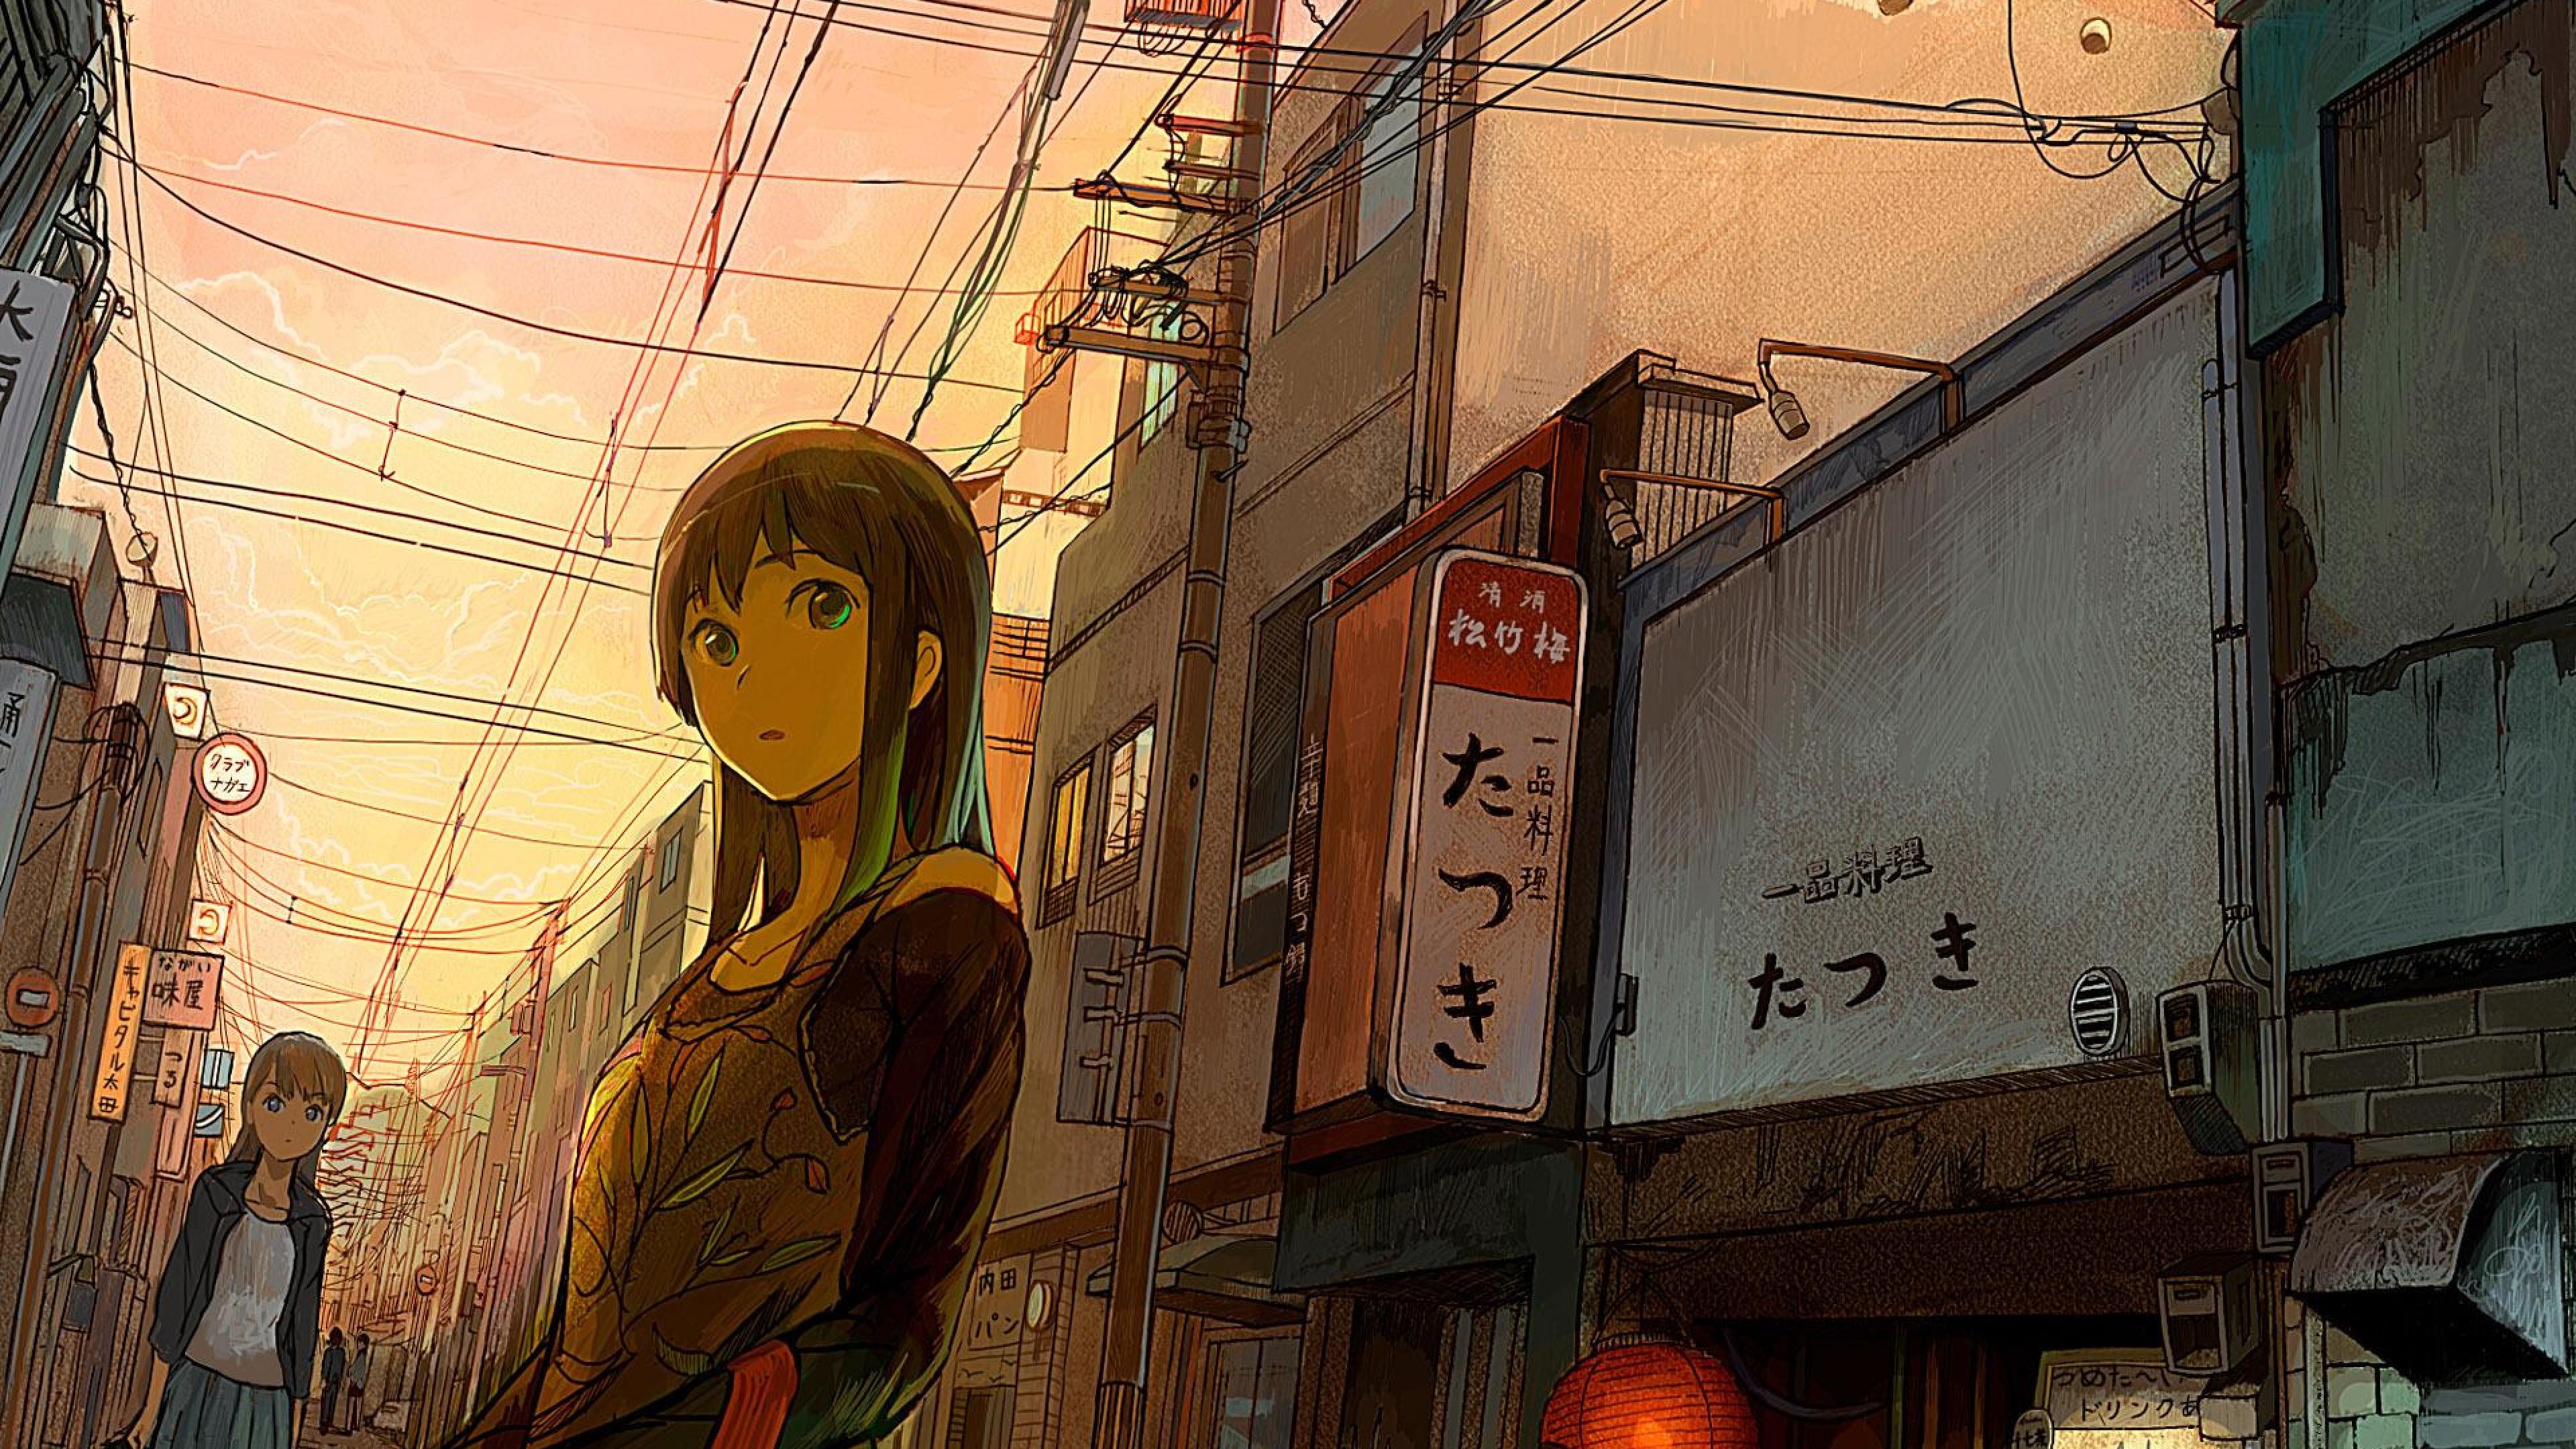 3840x2160 Anime cityscape City Woman Building Street Anime HD Wallpapers.